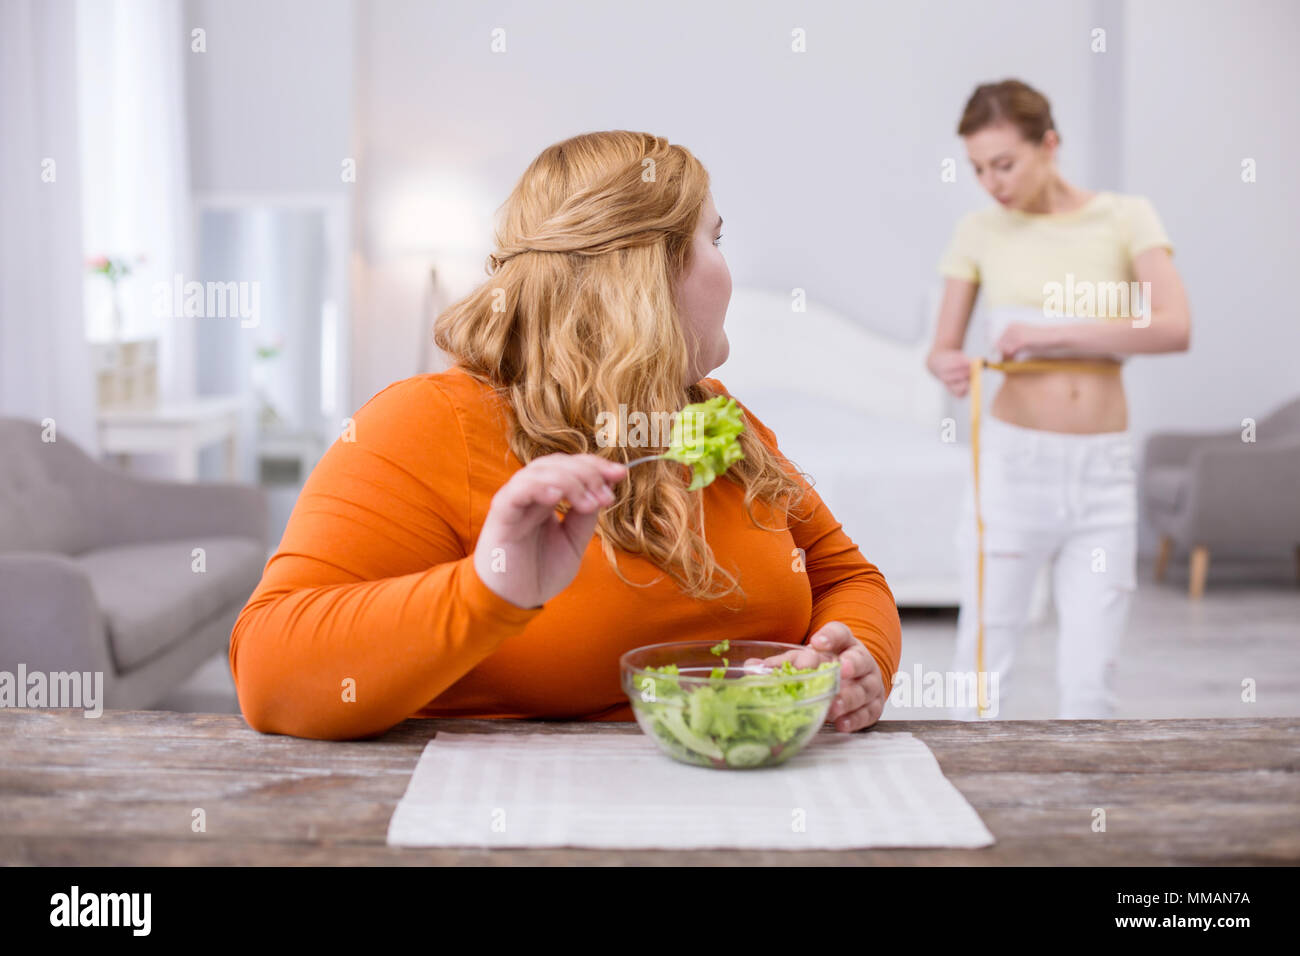 Fat woman looking at her slim friend Stock Photo